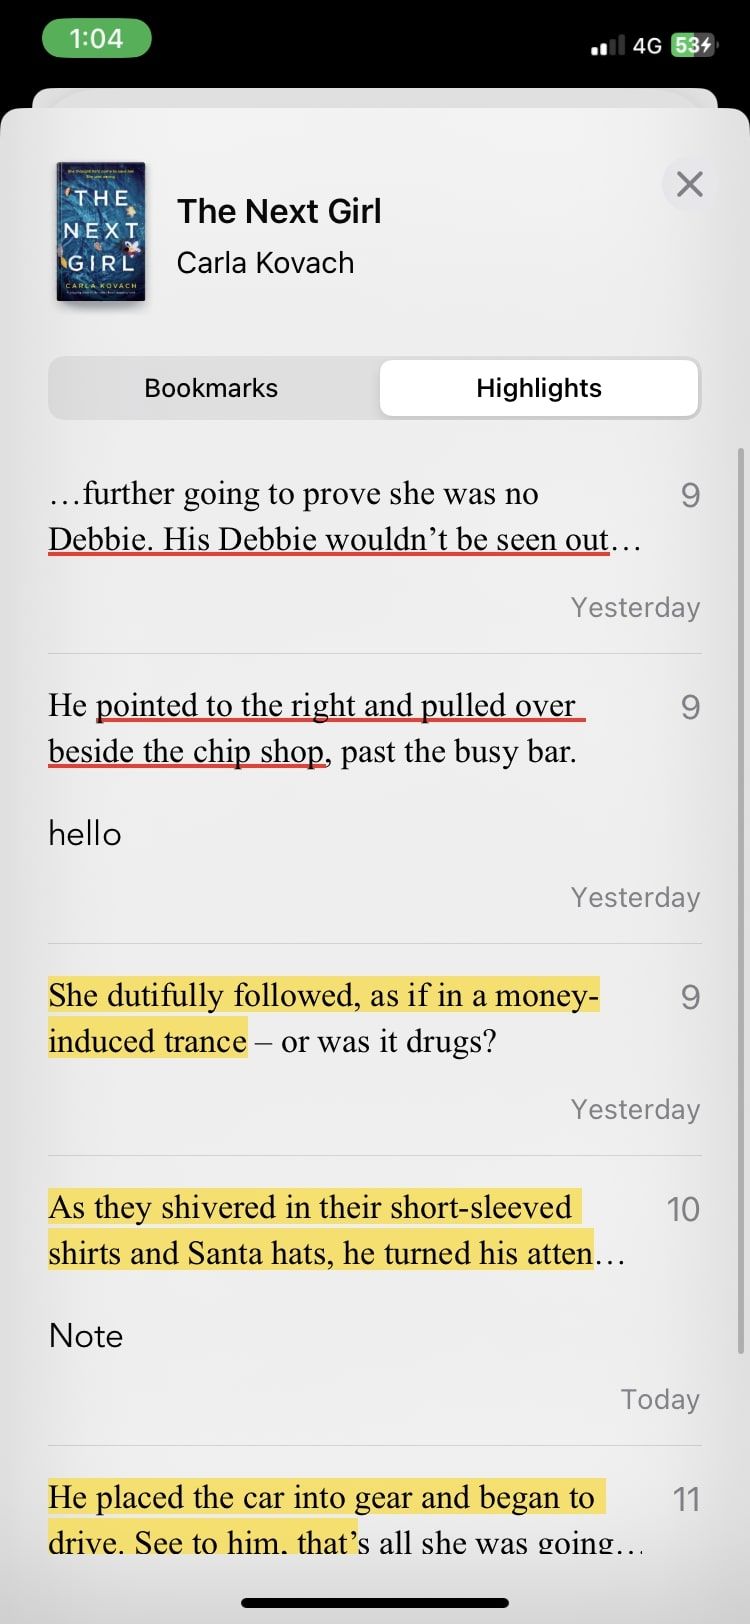 all annotations in the Apple Books app